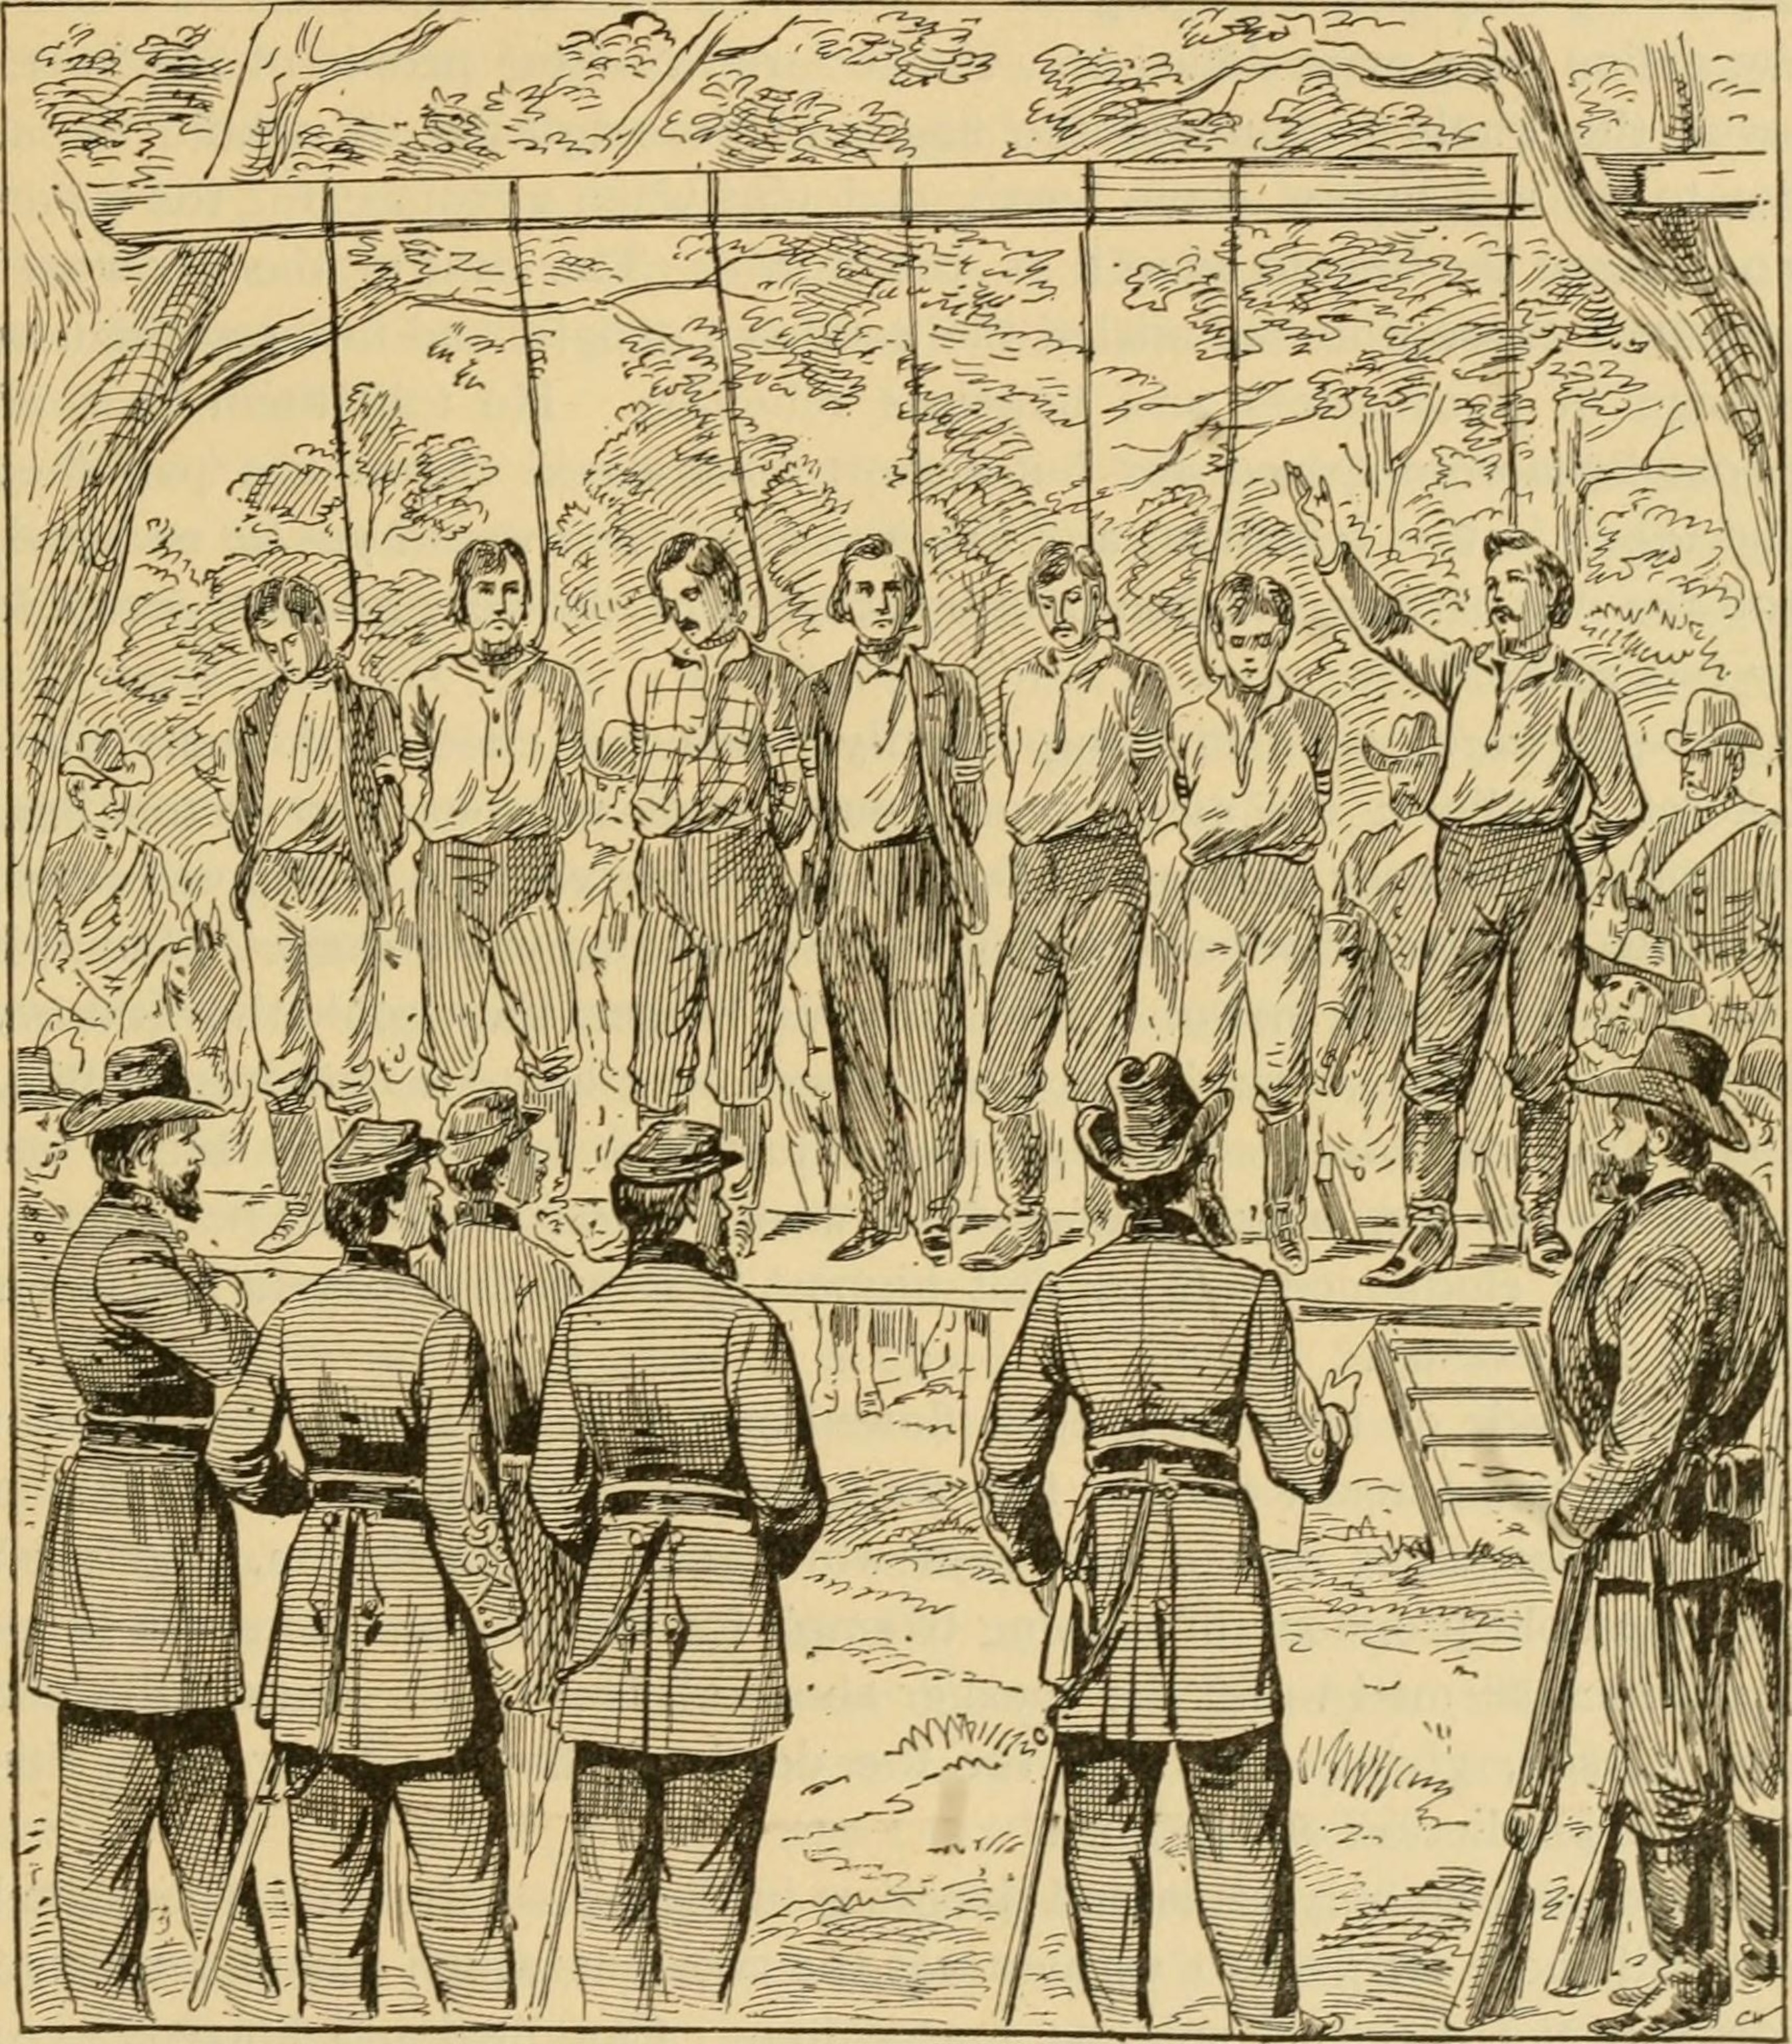 PHOTO: A depiction of the raiders hanging from the gallows. 